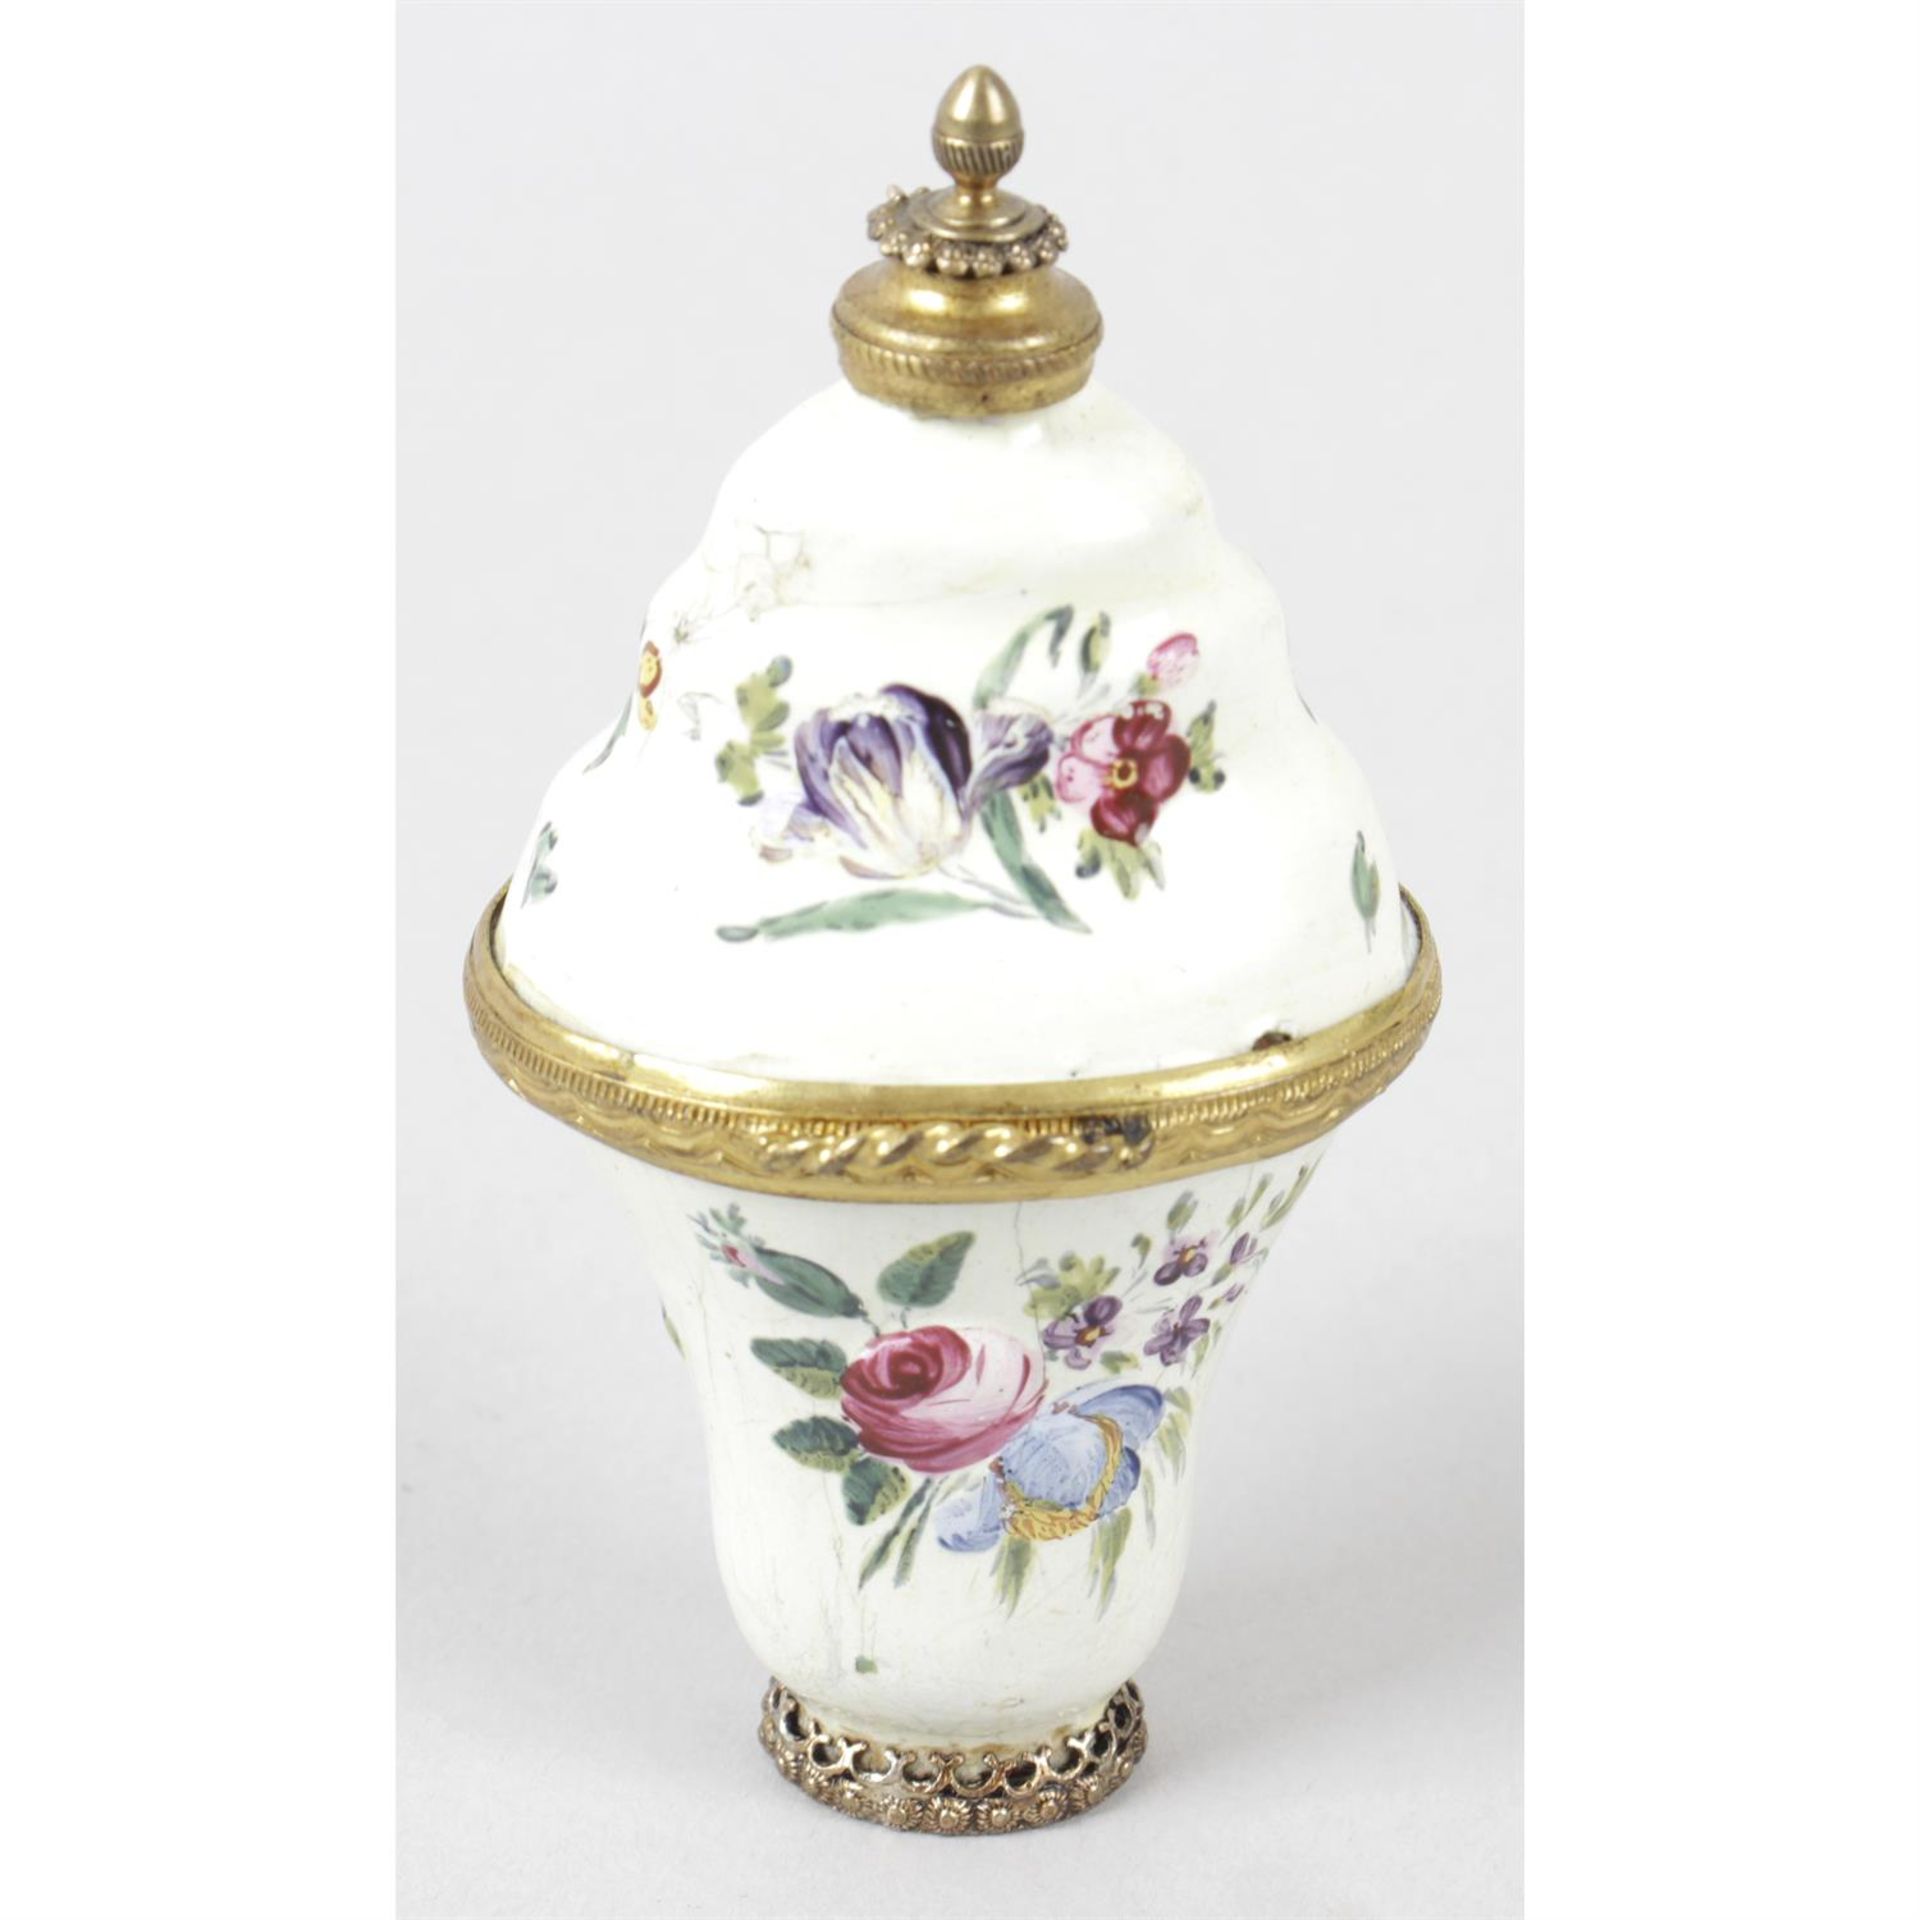 An antique enamelled ladies scent bottle and vanity case.